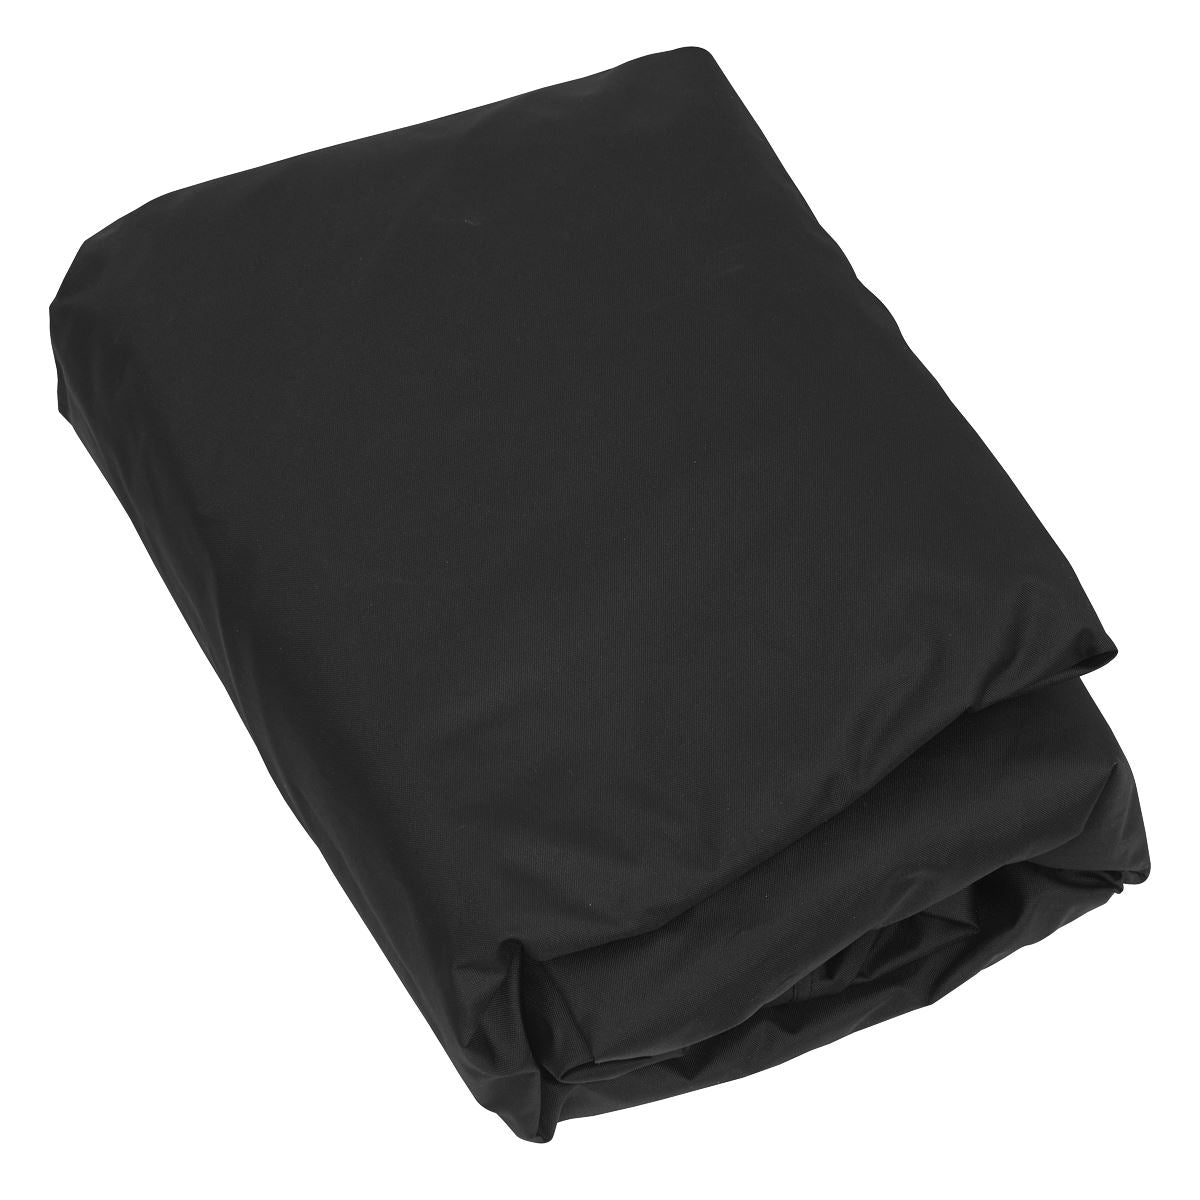 Sealey Motorcycle Transport Cover - Large